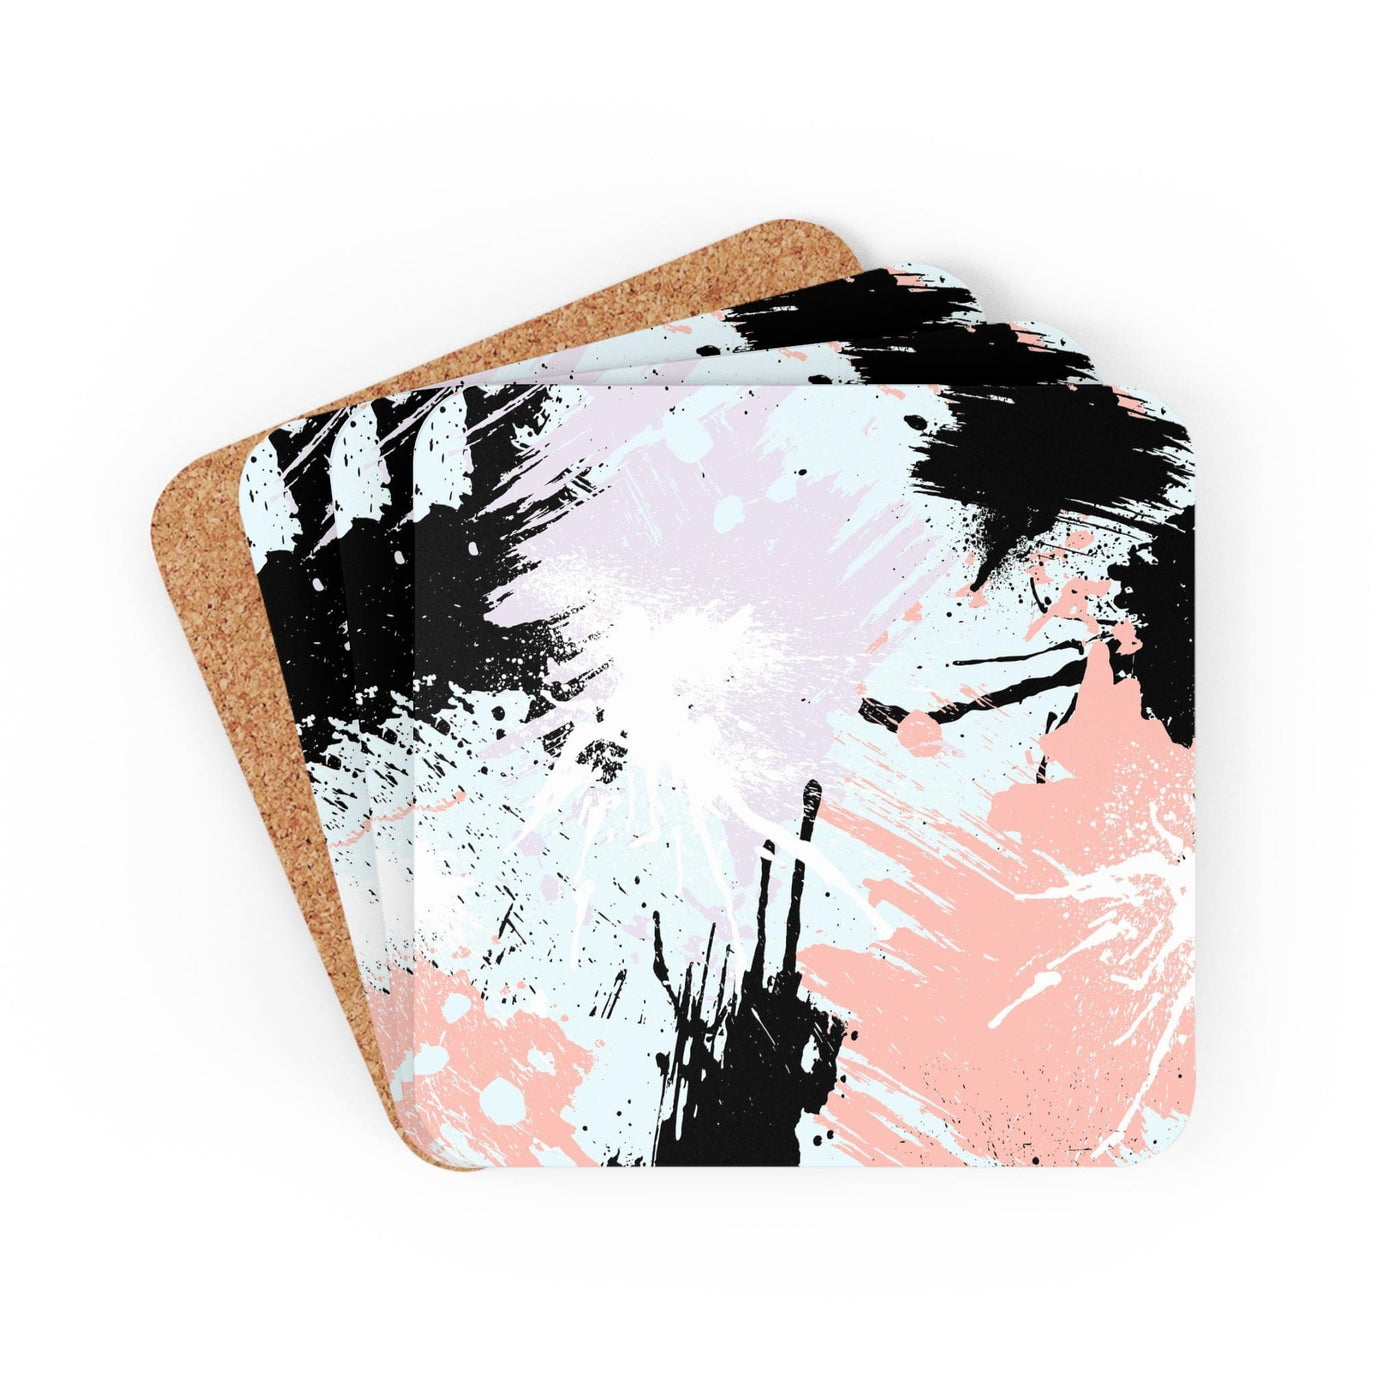 Handcrafted Square Coaster Set Of 4 For Drinks And Cups Pink Black Abstract